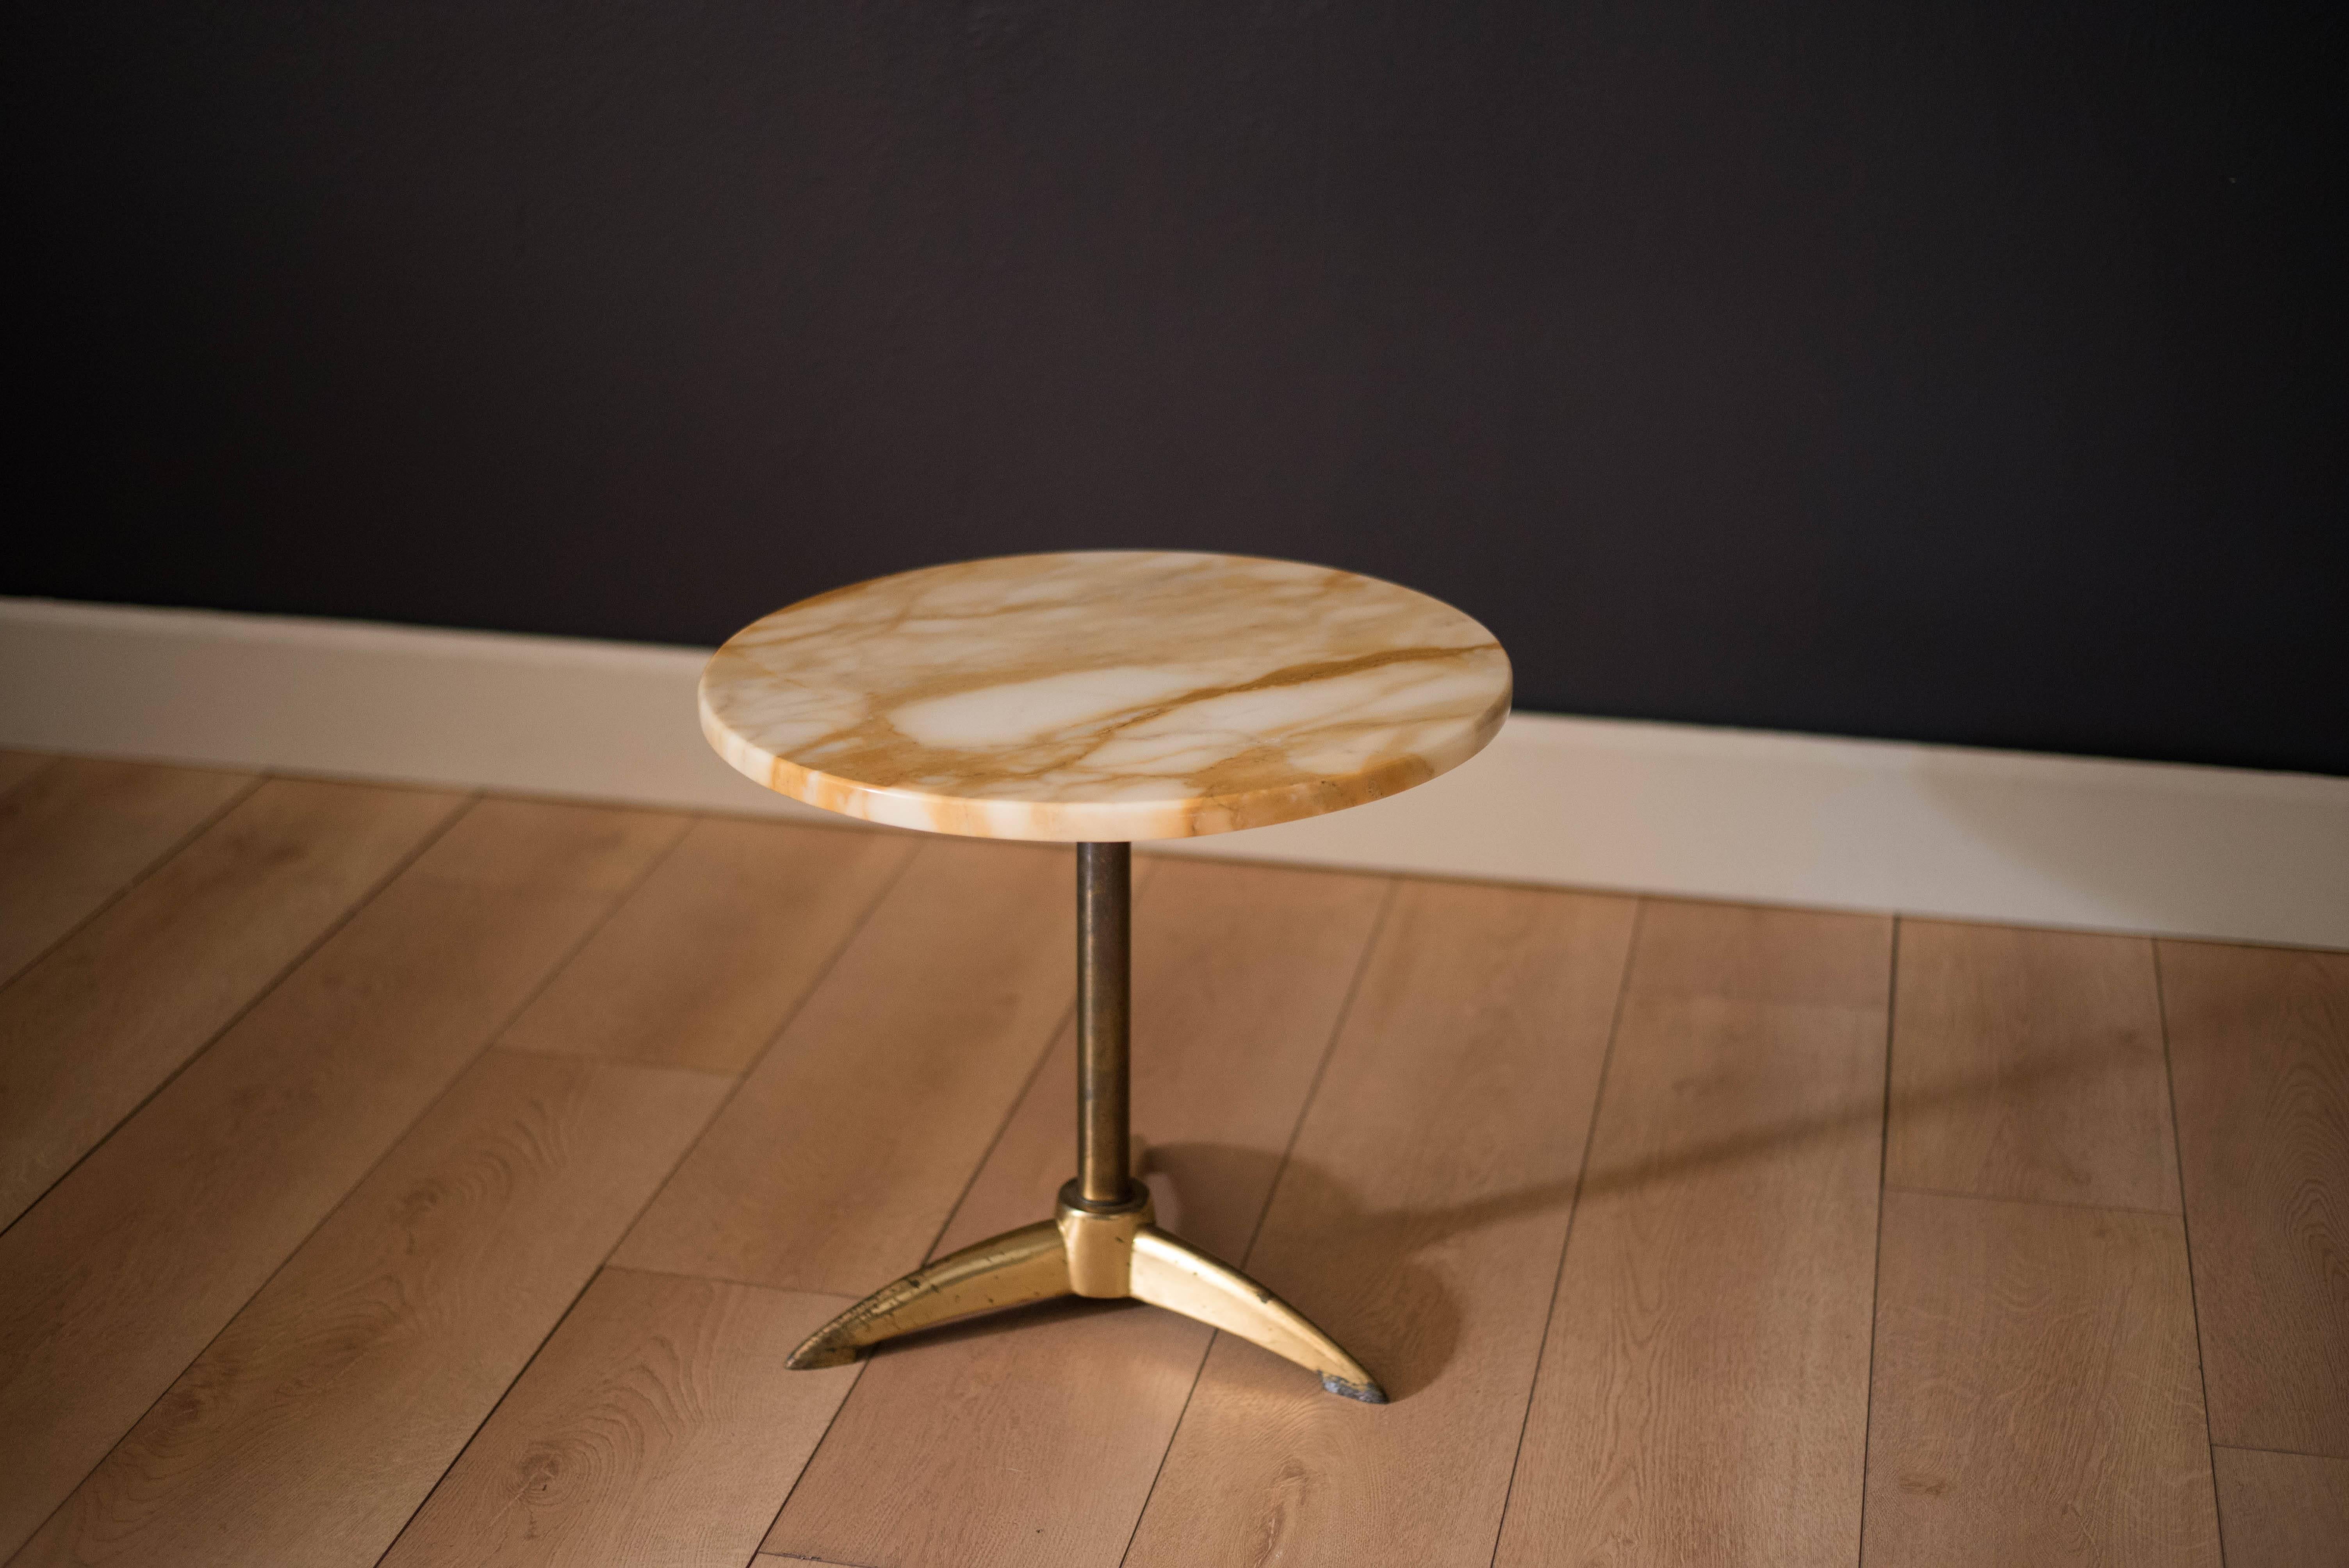 Mid century marble end table with brass pedestal base, circa 1960s. This piece features a round stone top with a white and neutral tone grain pattern made in Italy.